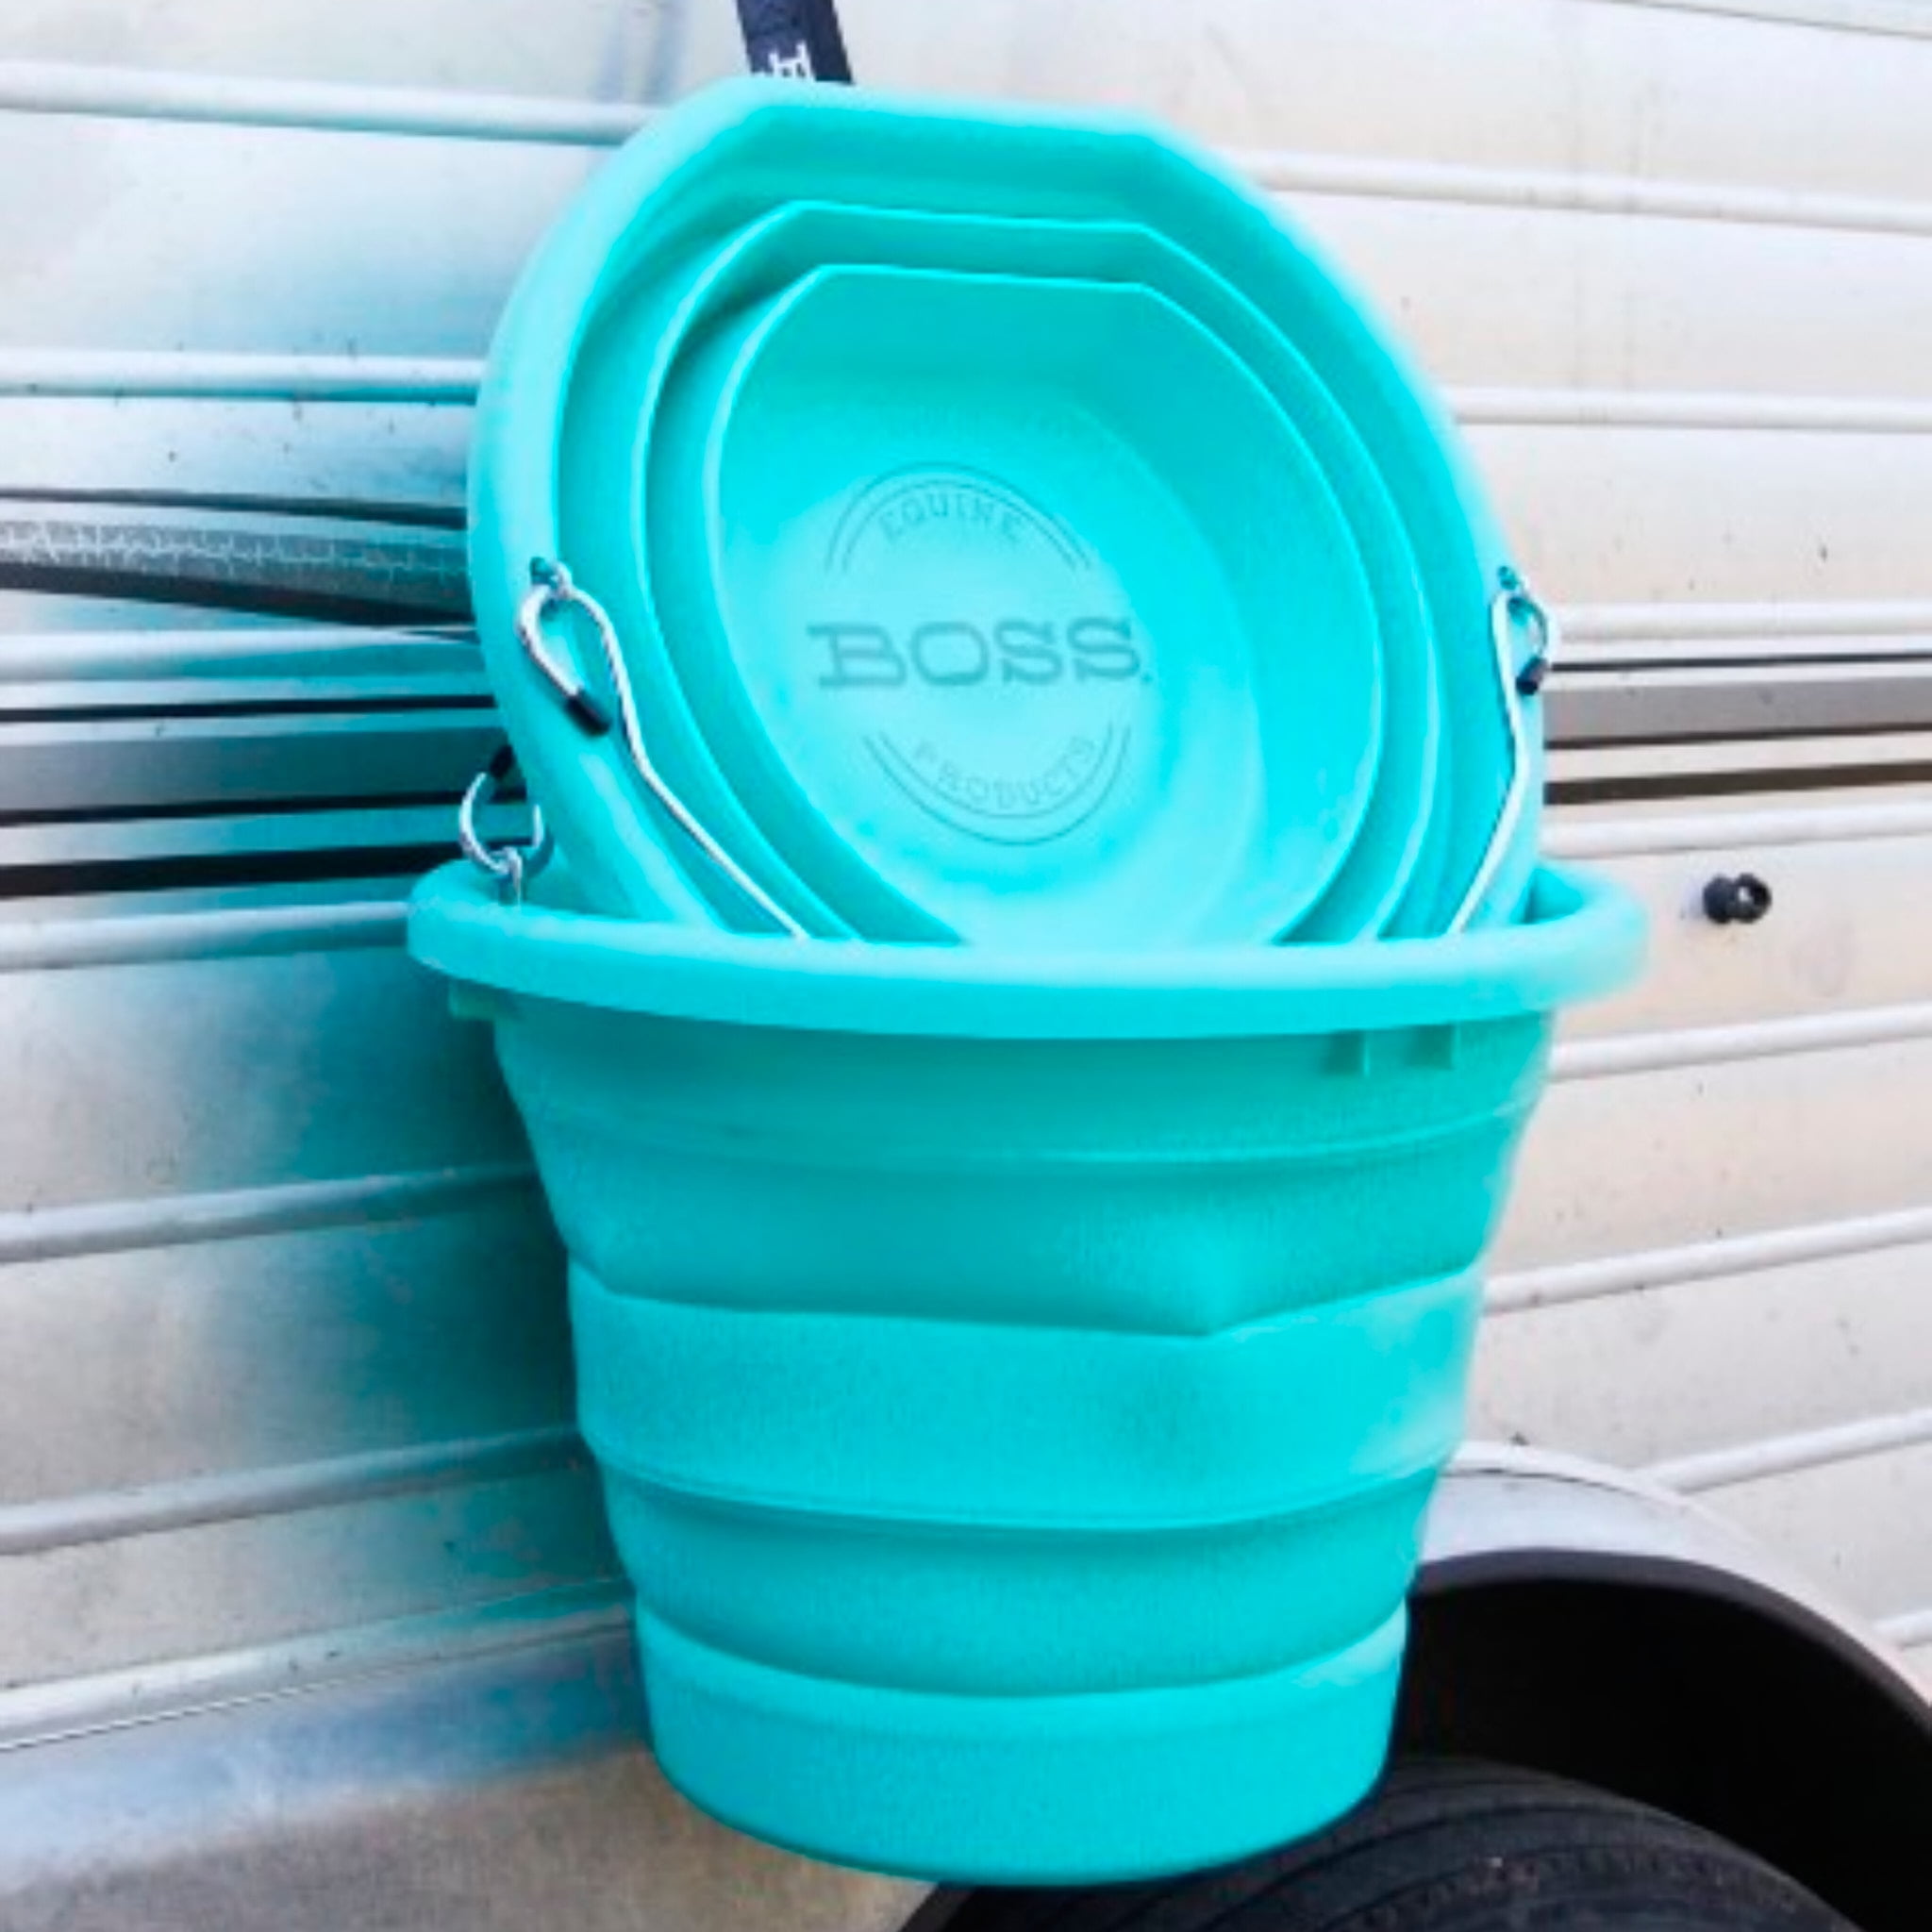 Boss Equine Products Boss Bucket (Turquoise)